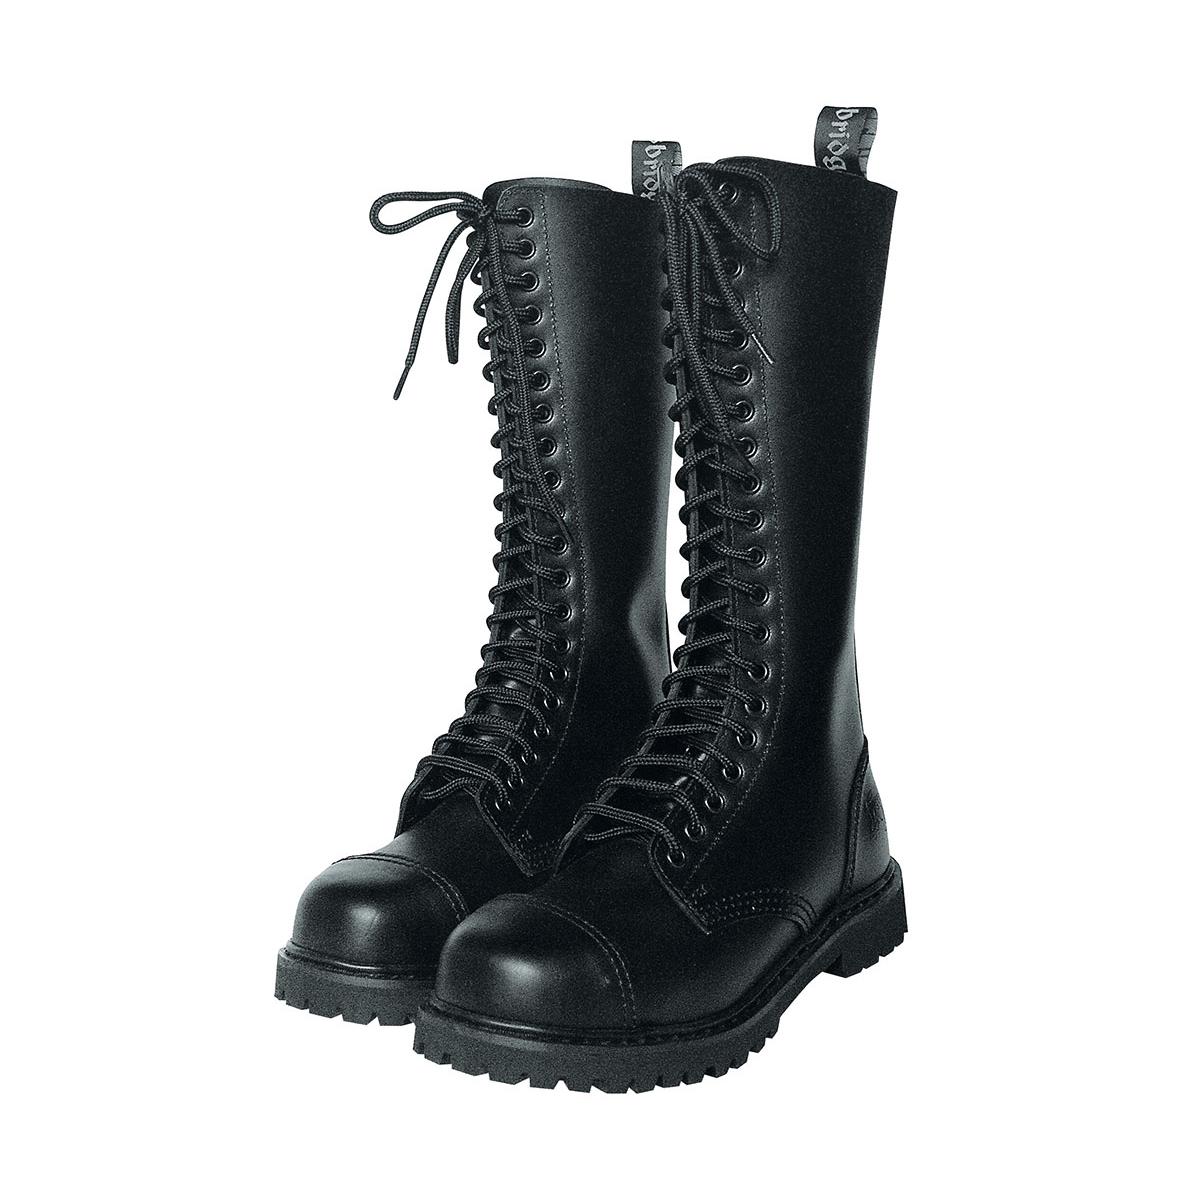 Ranger Boots England Gothic Style 20 Loch